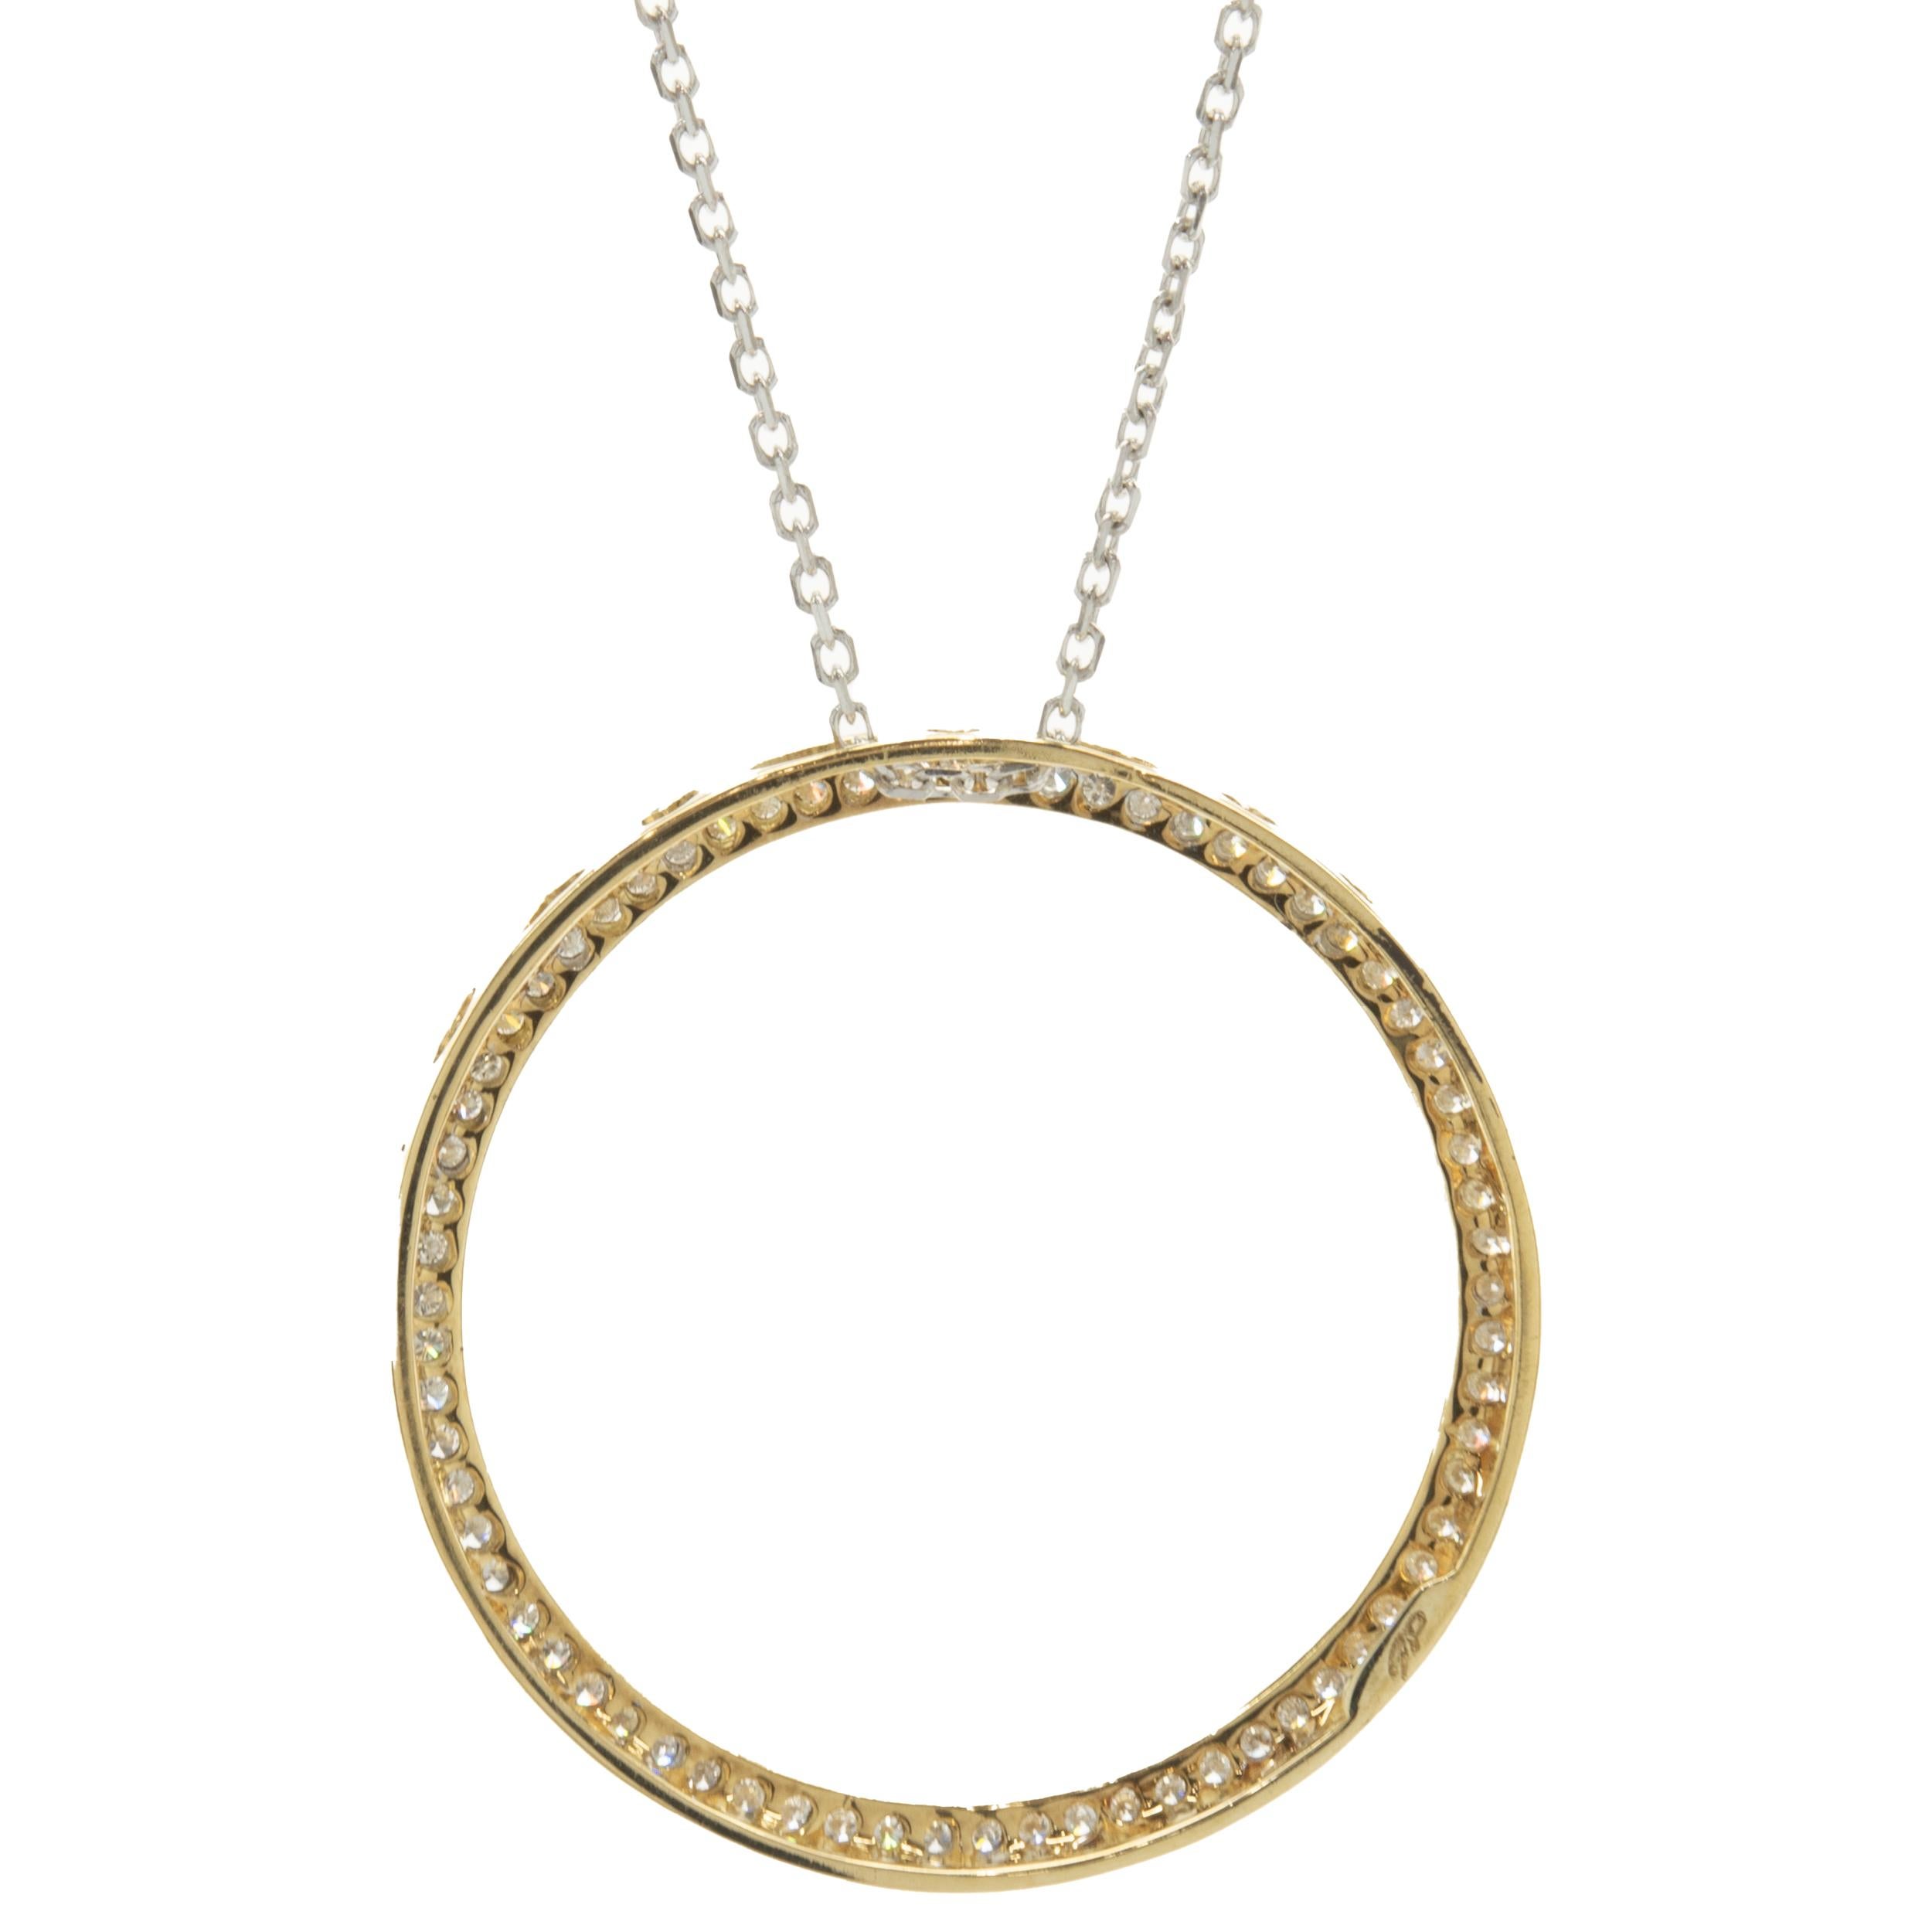 Designer: custom design
Material: 14K yellow and white gold
Diamonds: round brilliant cut = 0.50cttw
Color: G
Clarity: SI1
Dimensions: necklace measures 18-inches in length 
Weight: 3.90 grams
